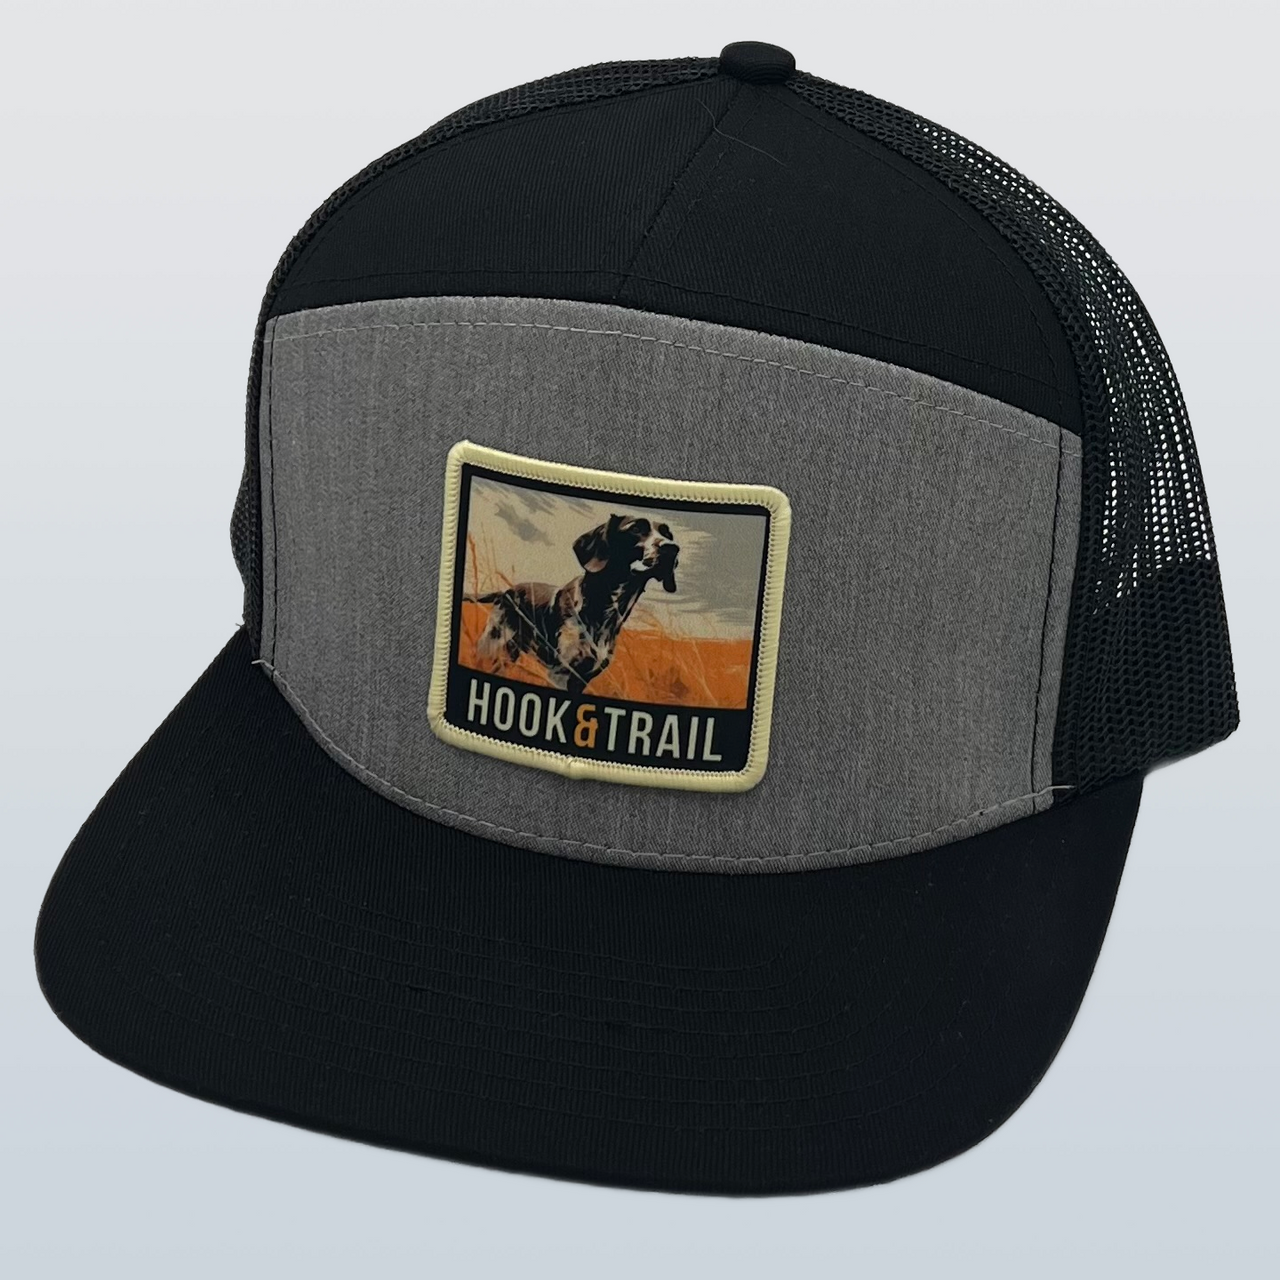 Heather Grey/Black 7 Panel Cap by Hook & Trail with Pointer Patch emblem. Modern design, durable construction, and adjustable strap for comfort. Versatile and stylish accessory for outdoor adventures and urban exploration.